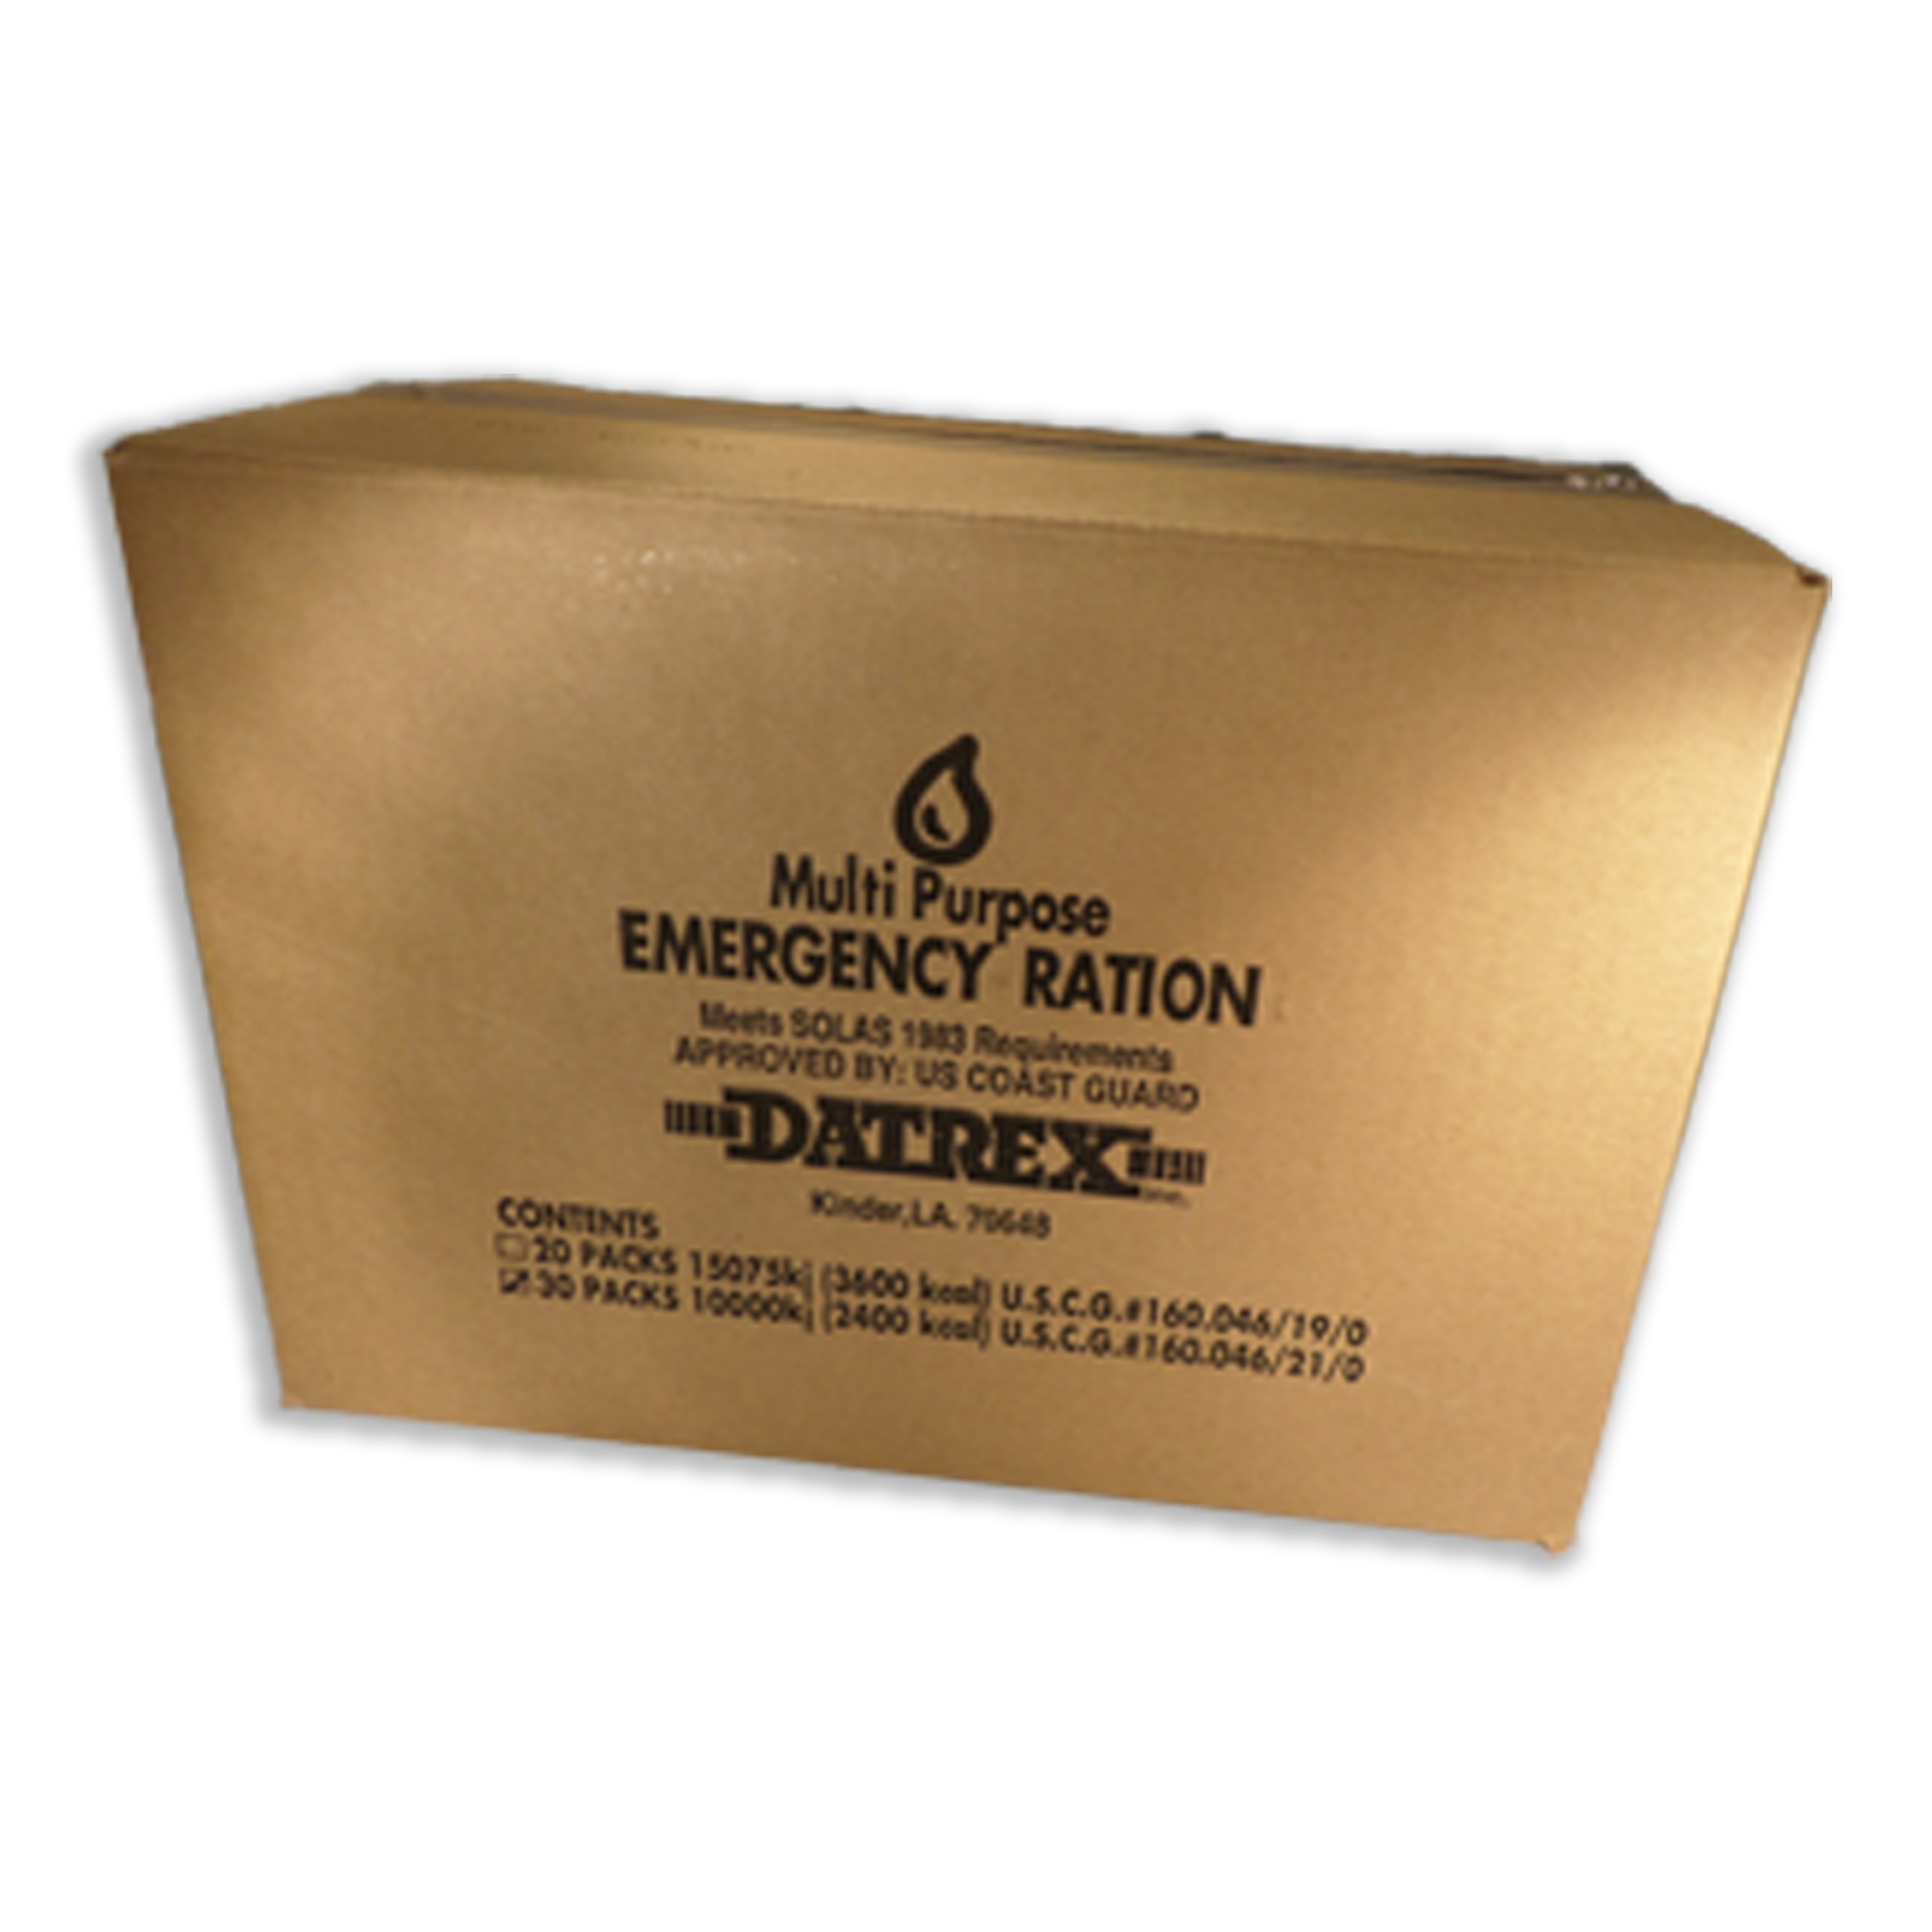 DATREX EMERGENCY FOOD RATION 2400 kcal 30 PACK CASE